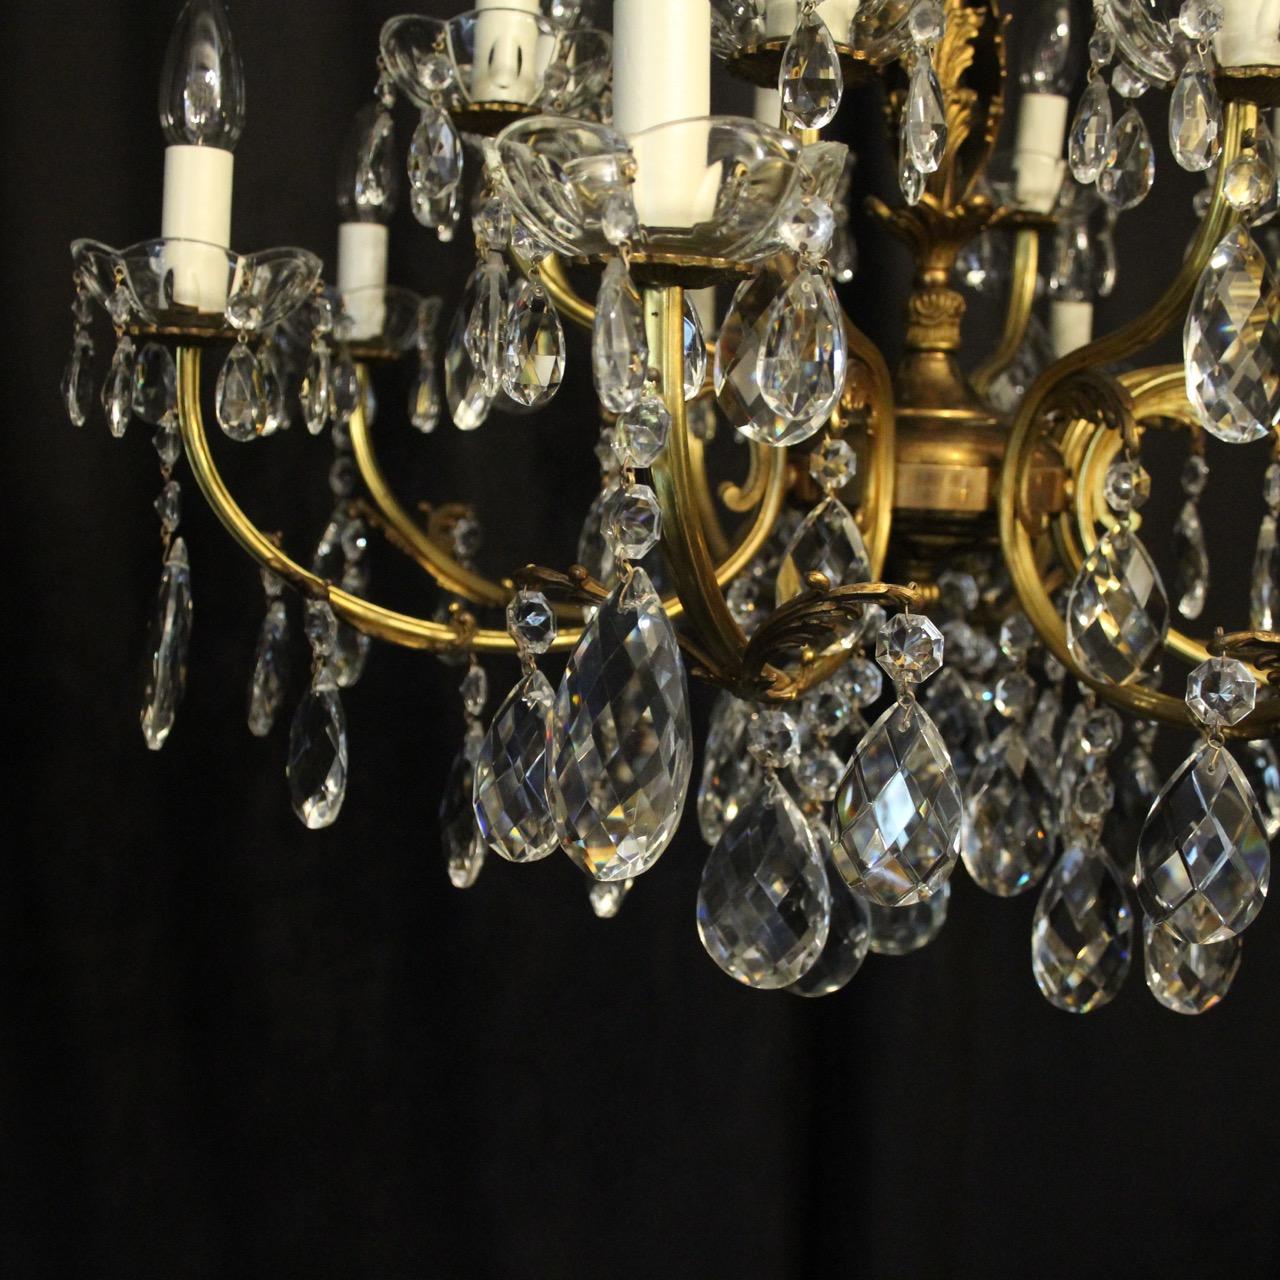 Italian Gilded and Crystal 16-Light Antique Chandelier (Messing)